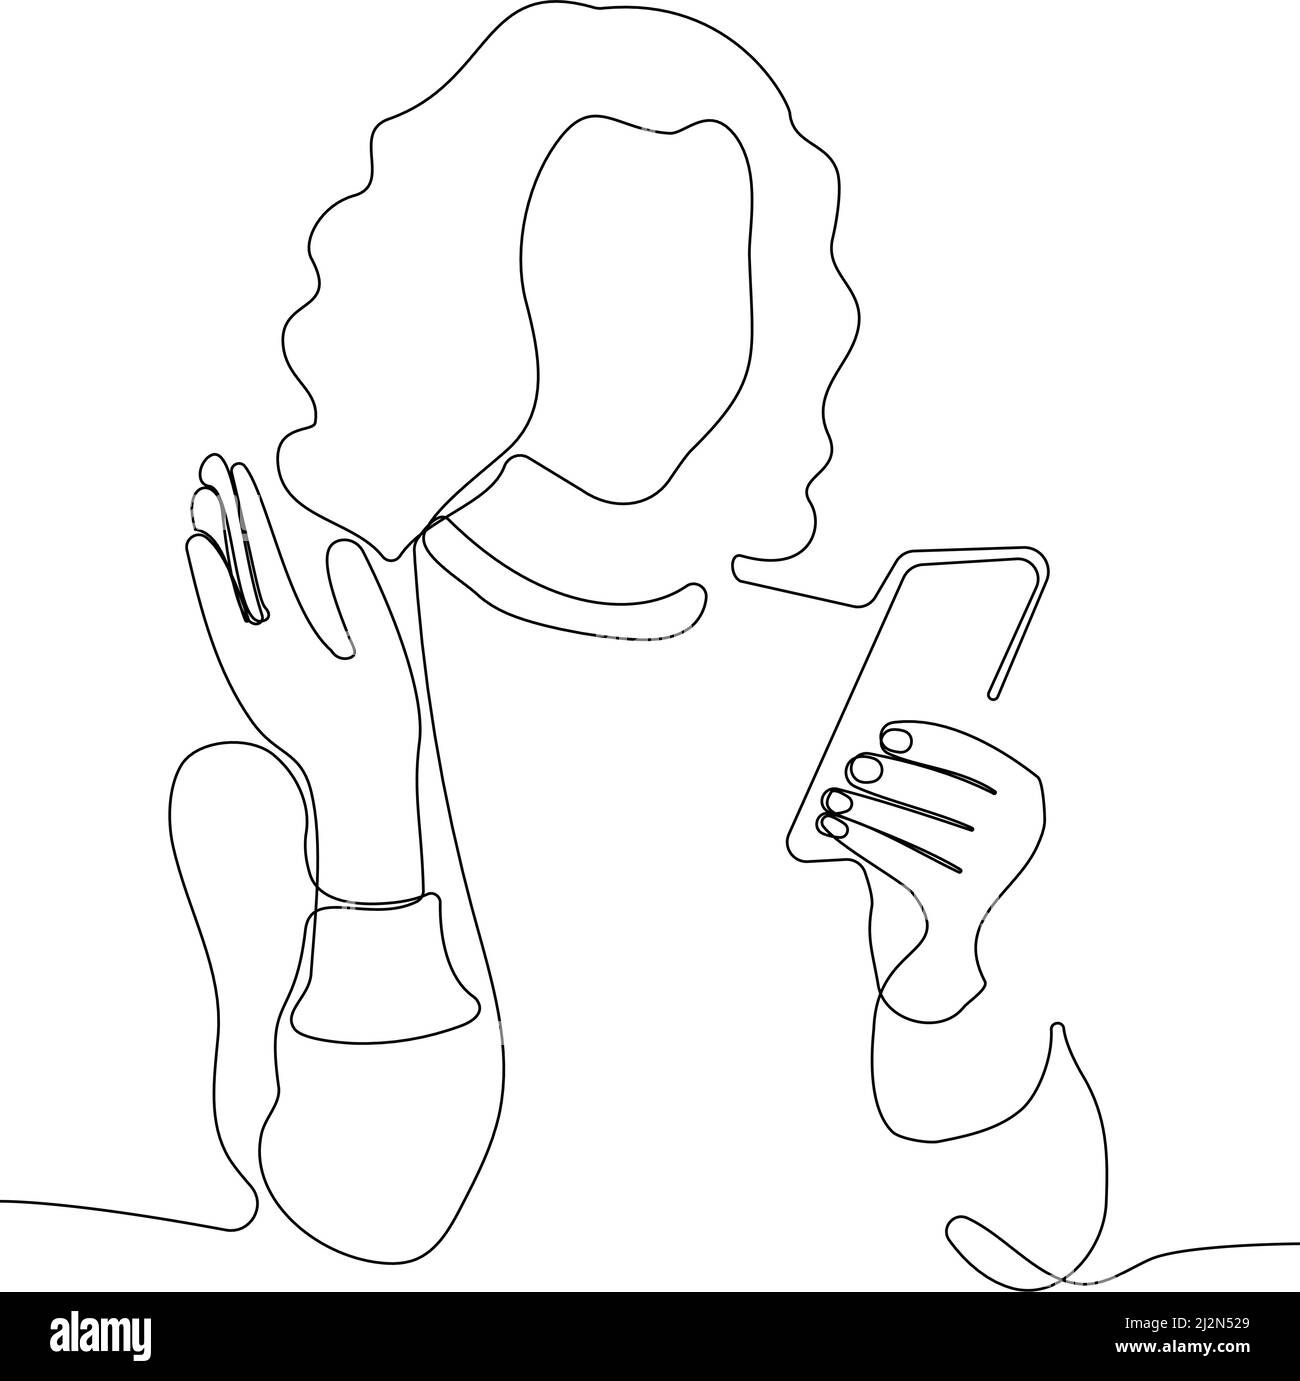 Young woman using smartphone to communicate Stock Vector